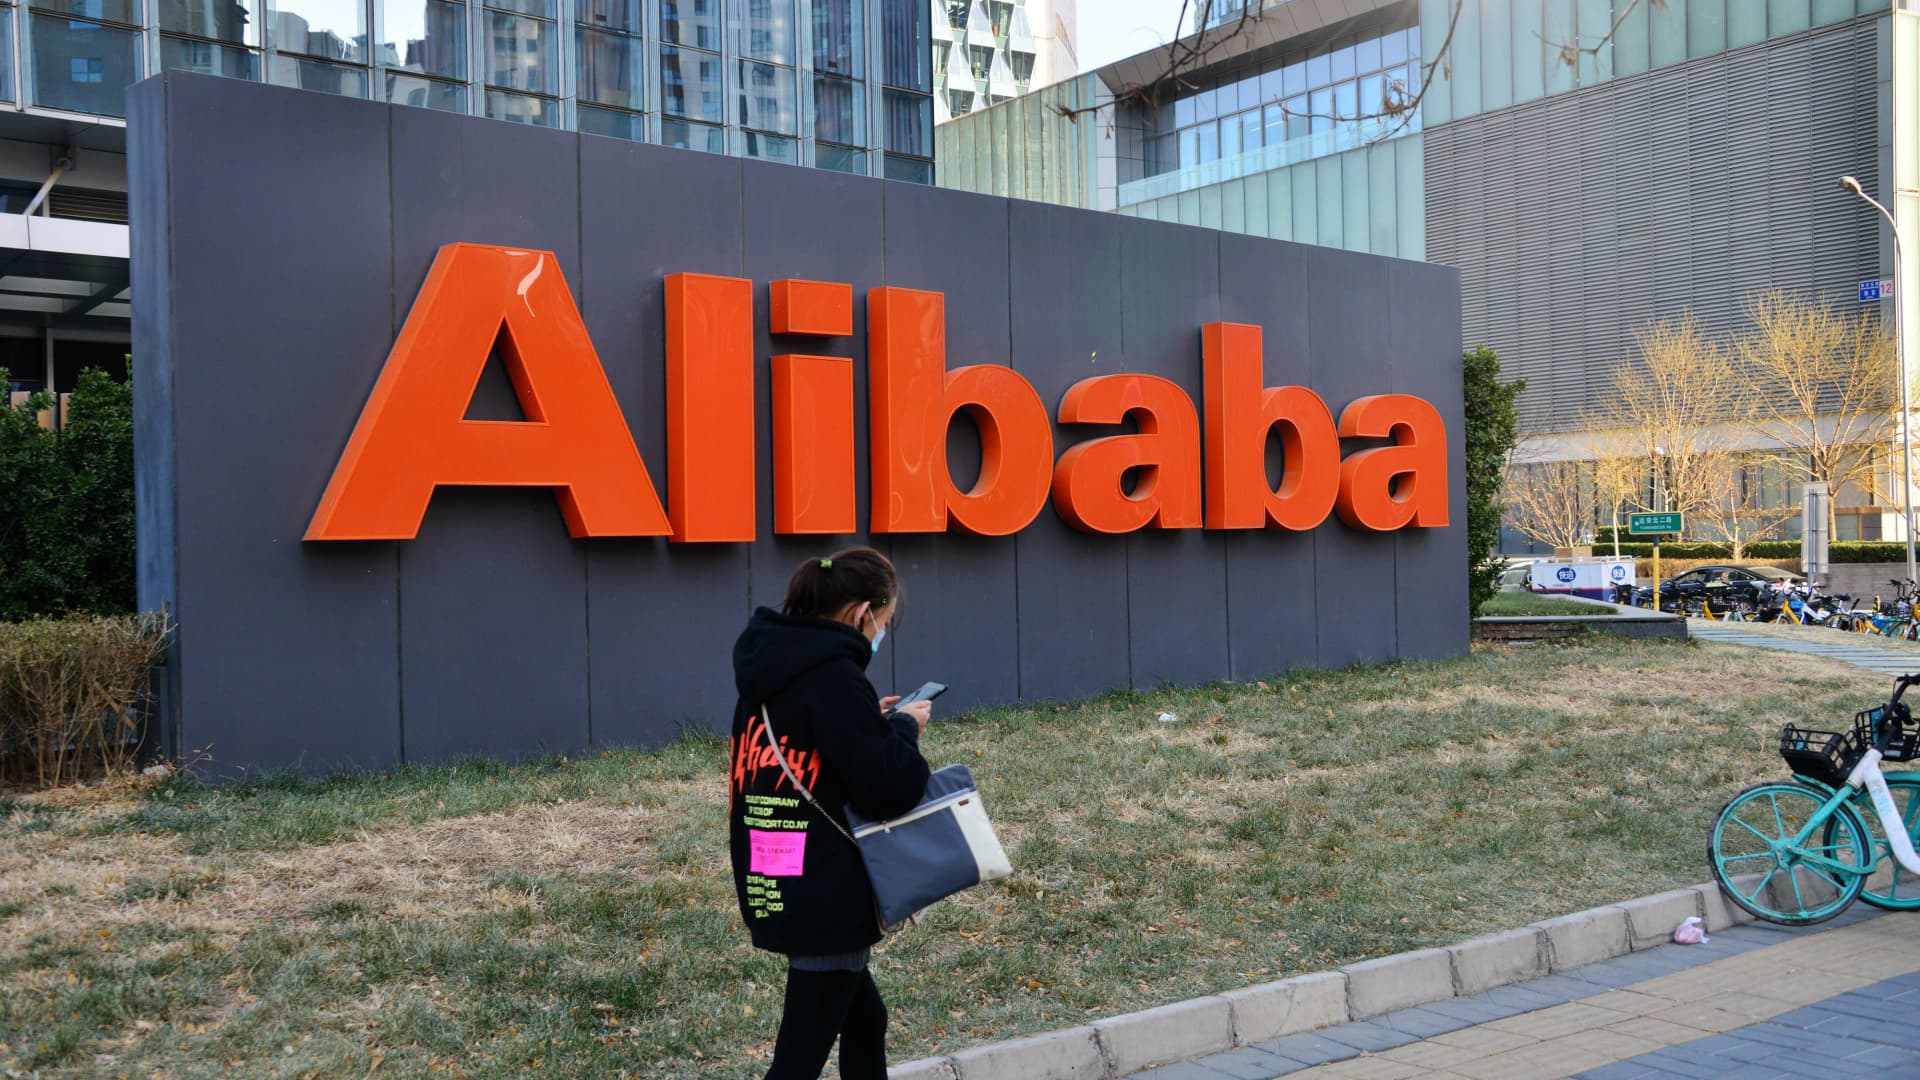 China's economic headwinds and slowing retail sales growth could weigh on Alibaba's fiscal second quarter earnings when it reports numbers on Thursday.